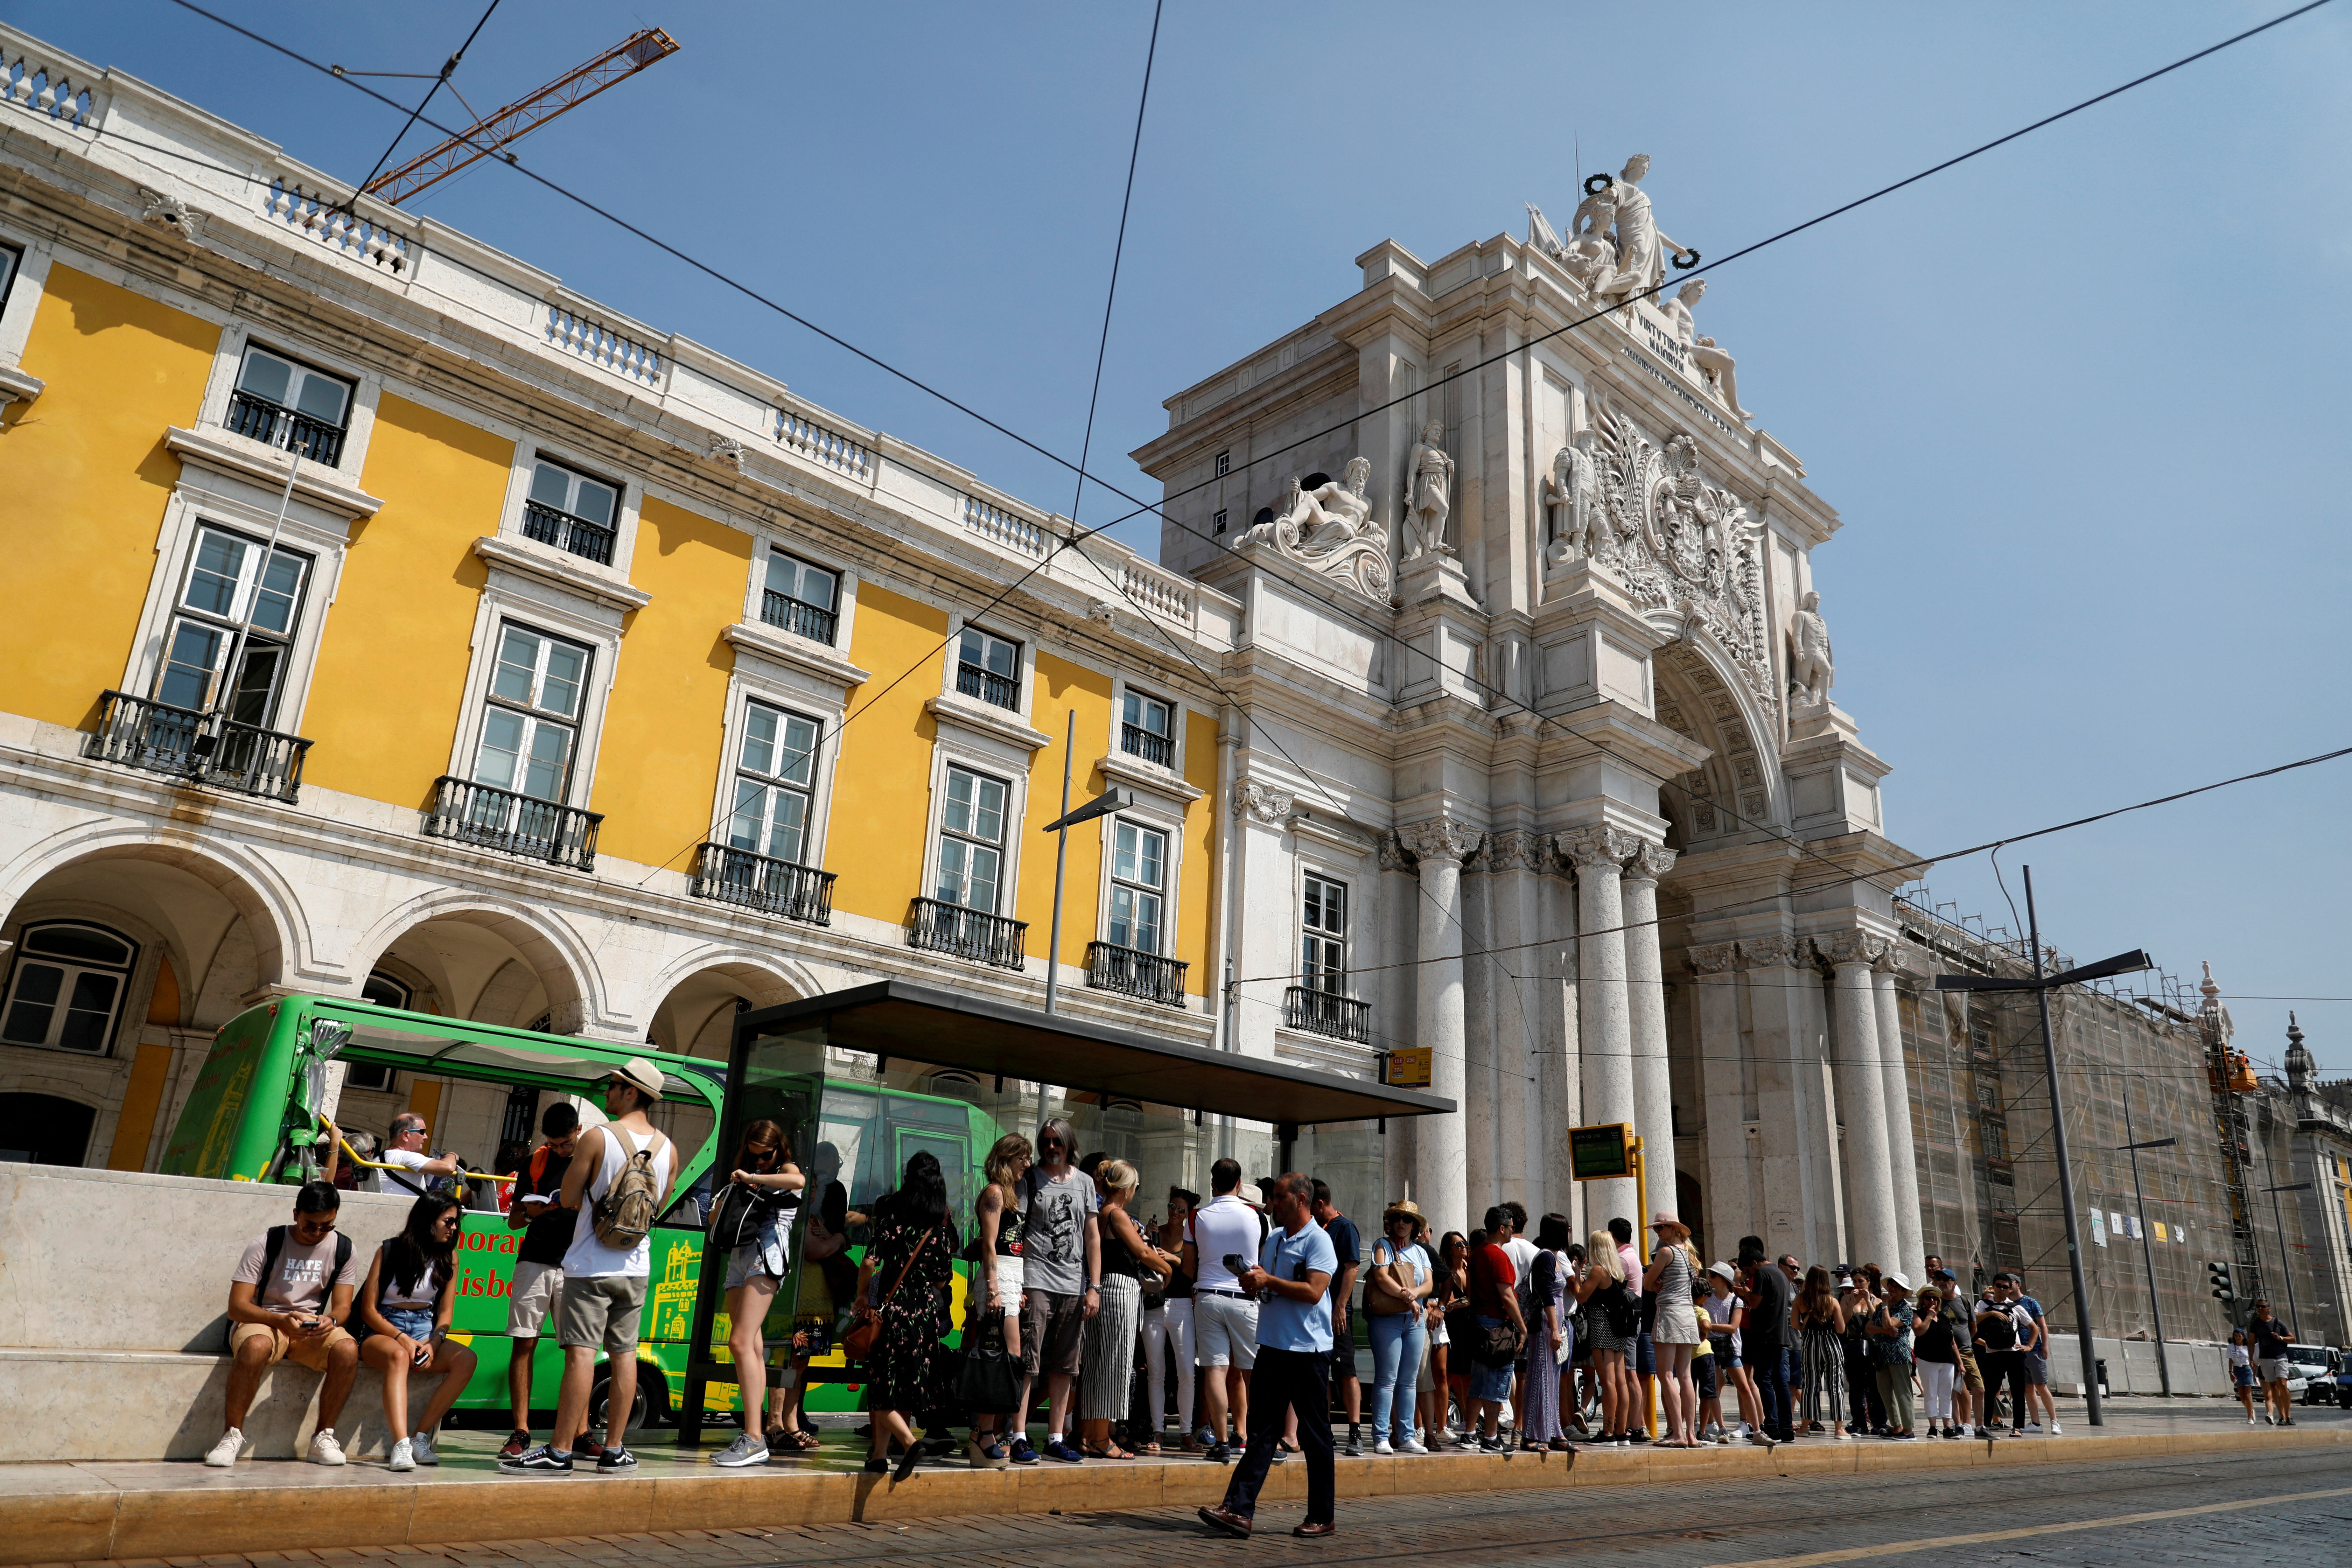 Tourists wait for a tram at Comercio square in downtown Lisbon